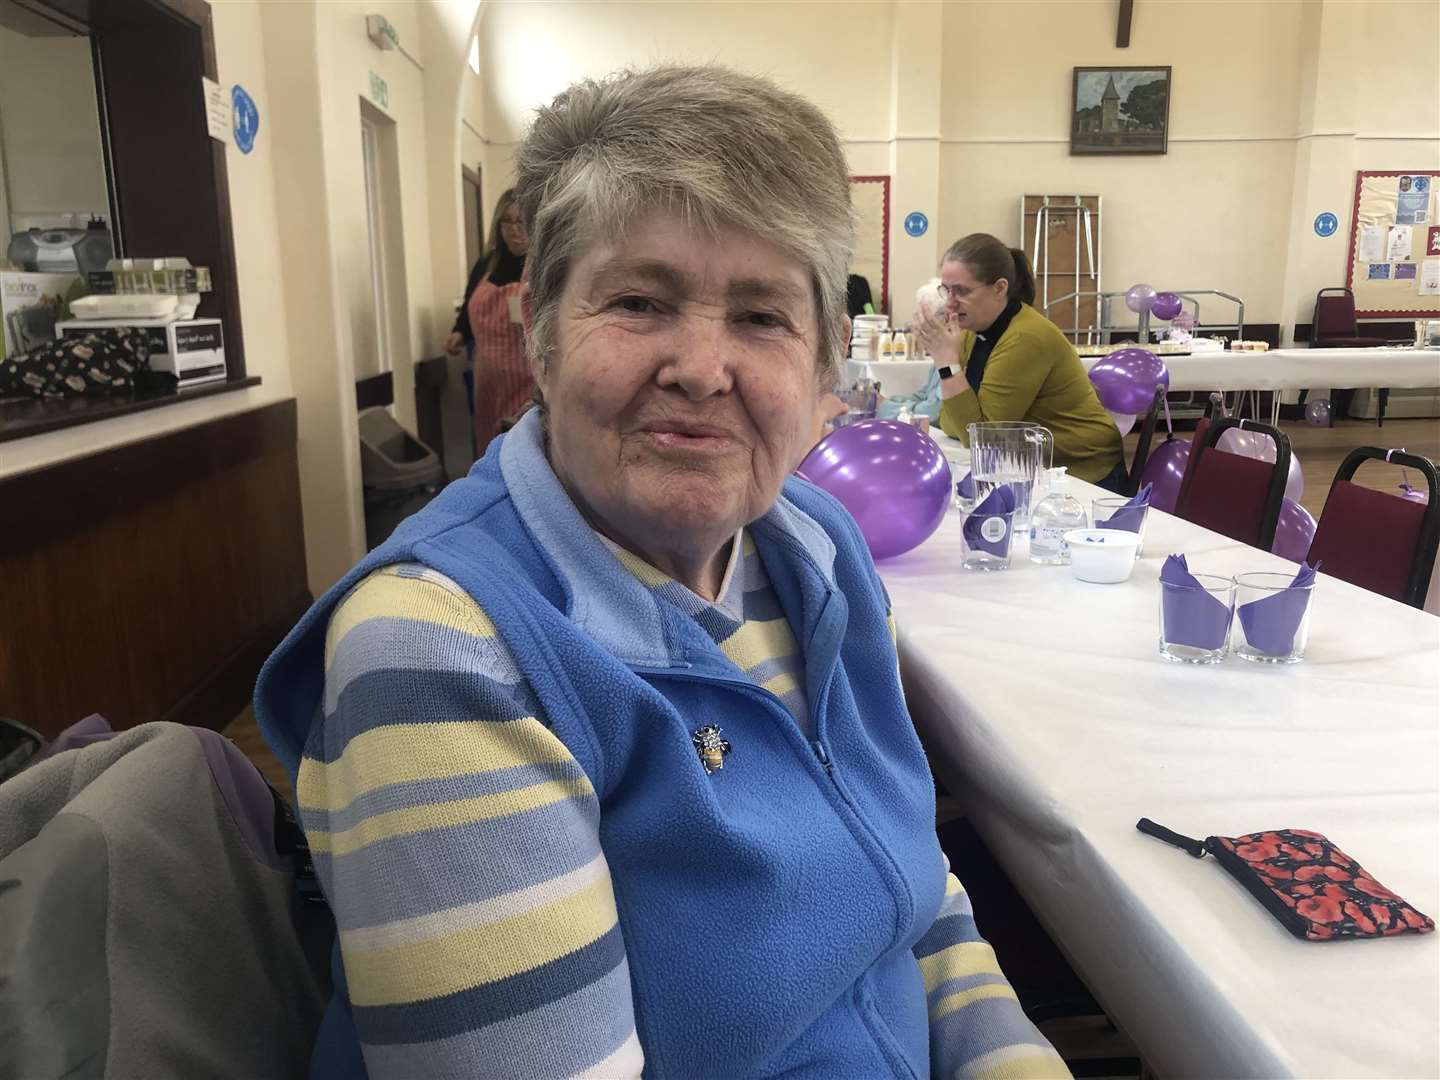 Jeannette Woolton, 68, has been attending the club since it opened